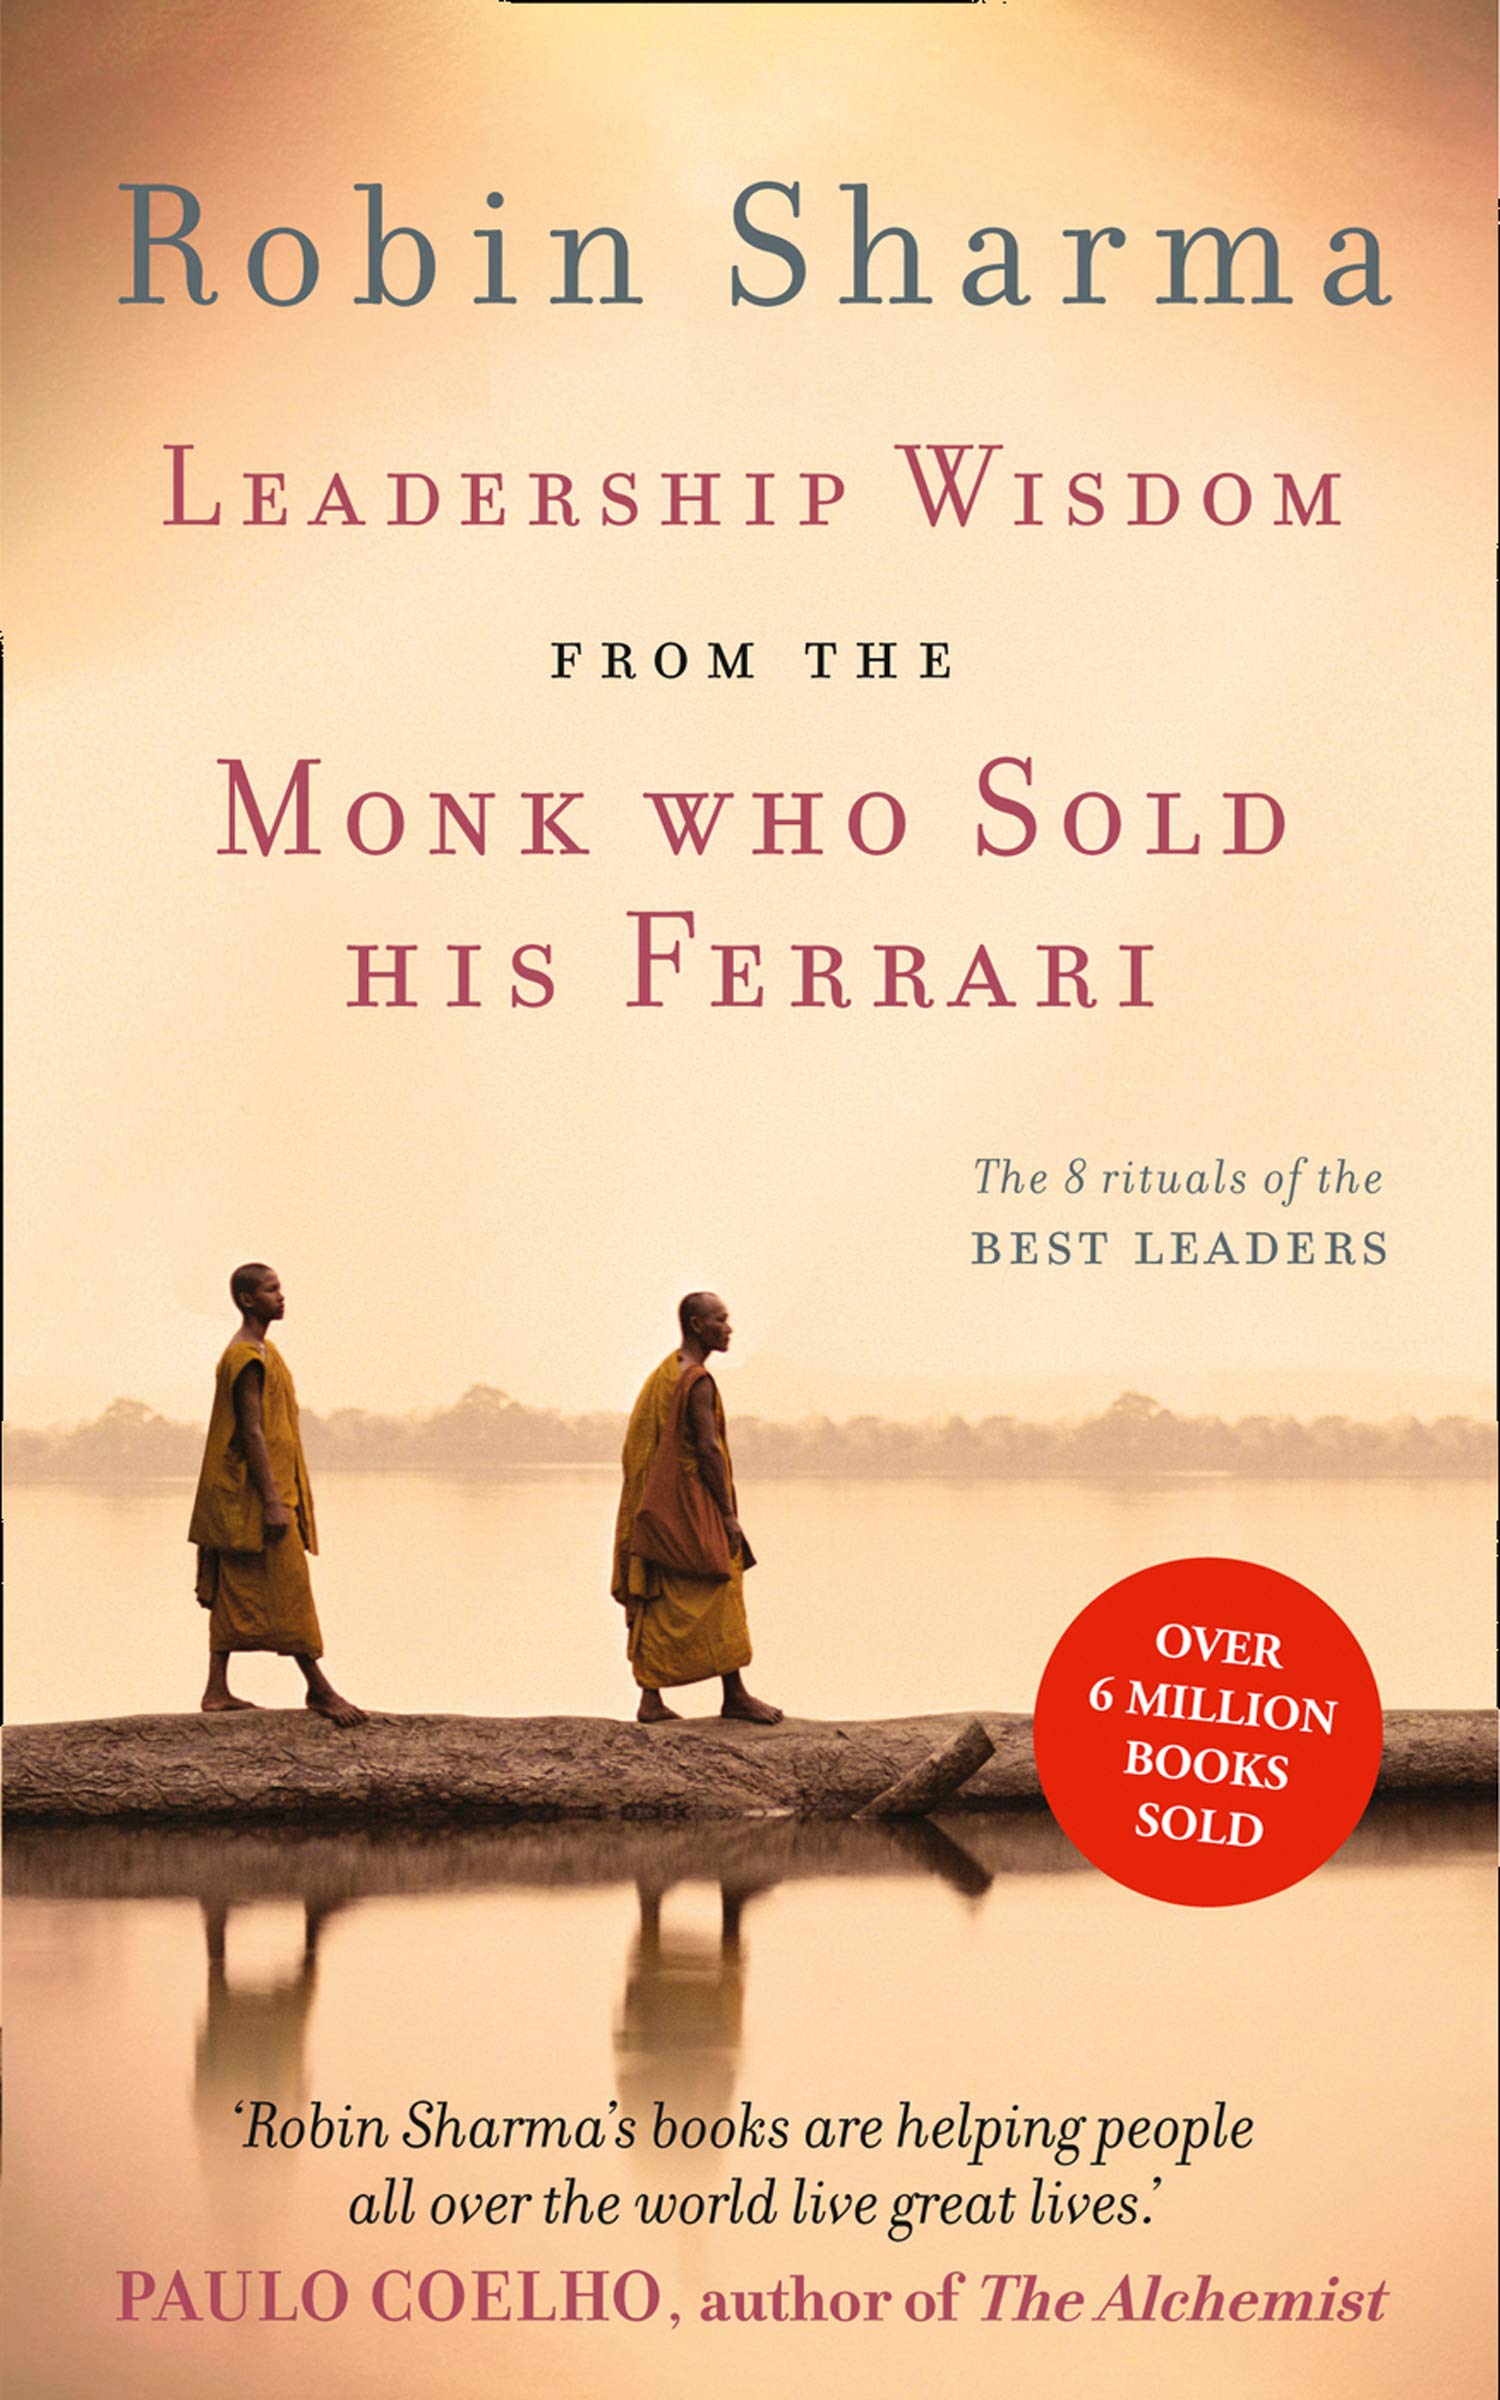 R.SHARMA -LEADERSHIP WISDOM FROM THE MONK WHO SOLD